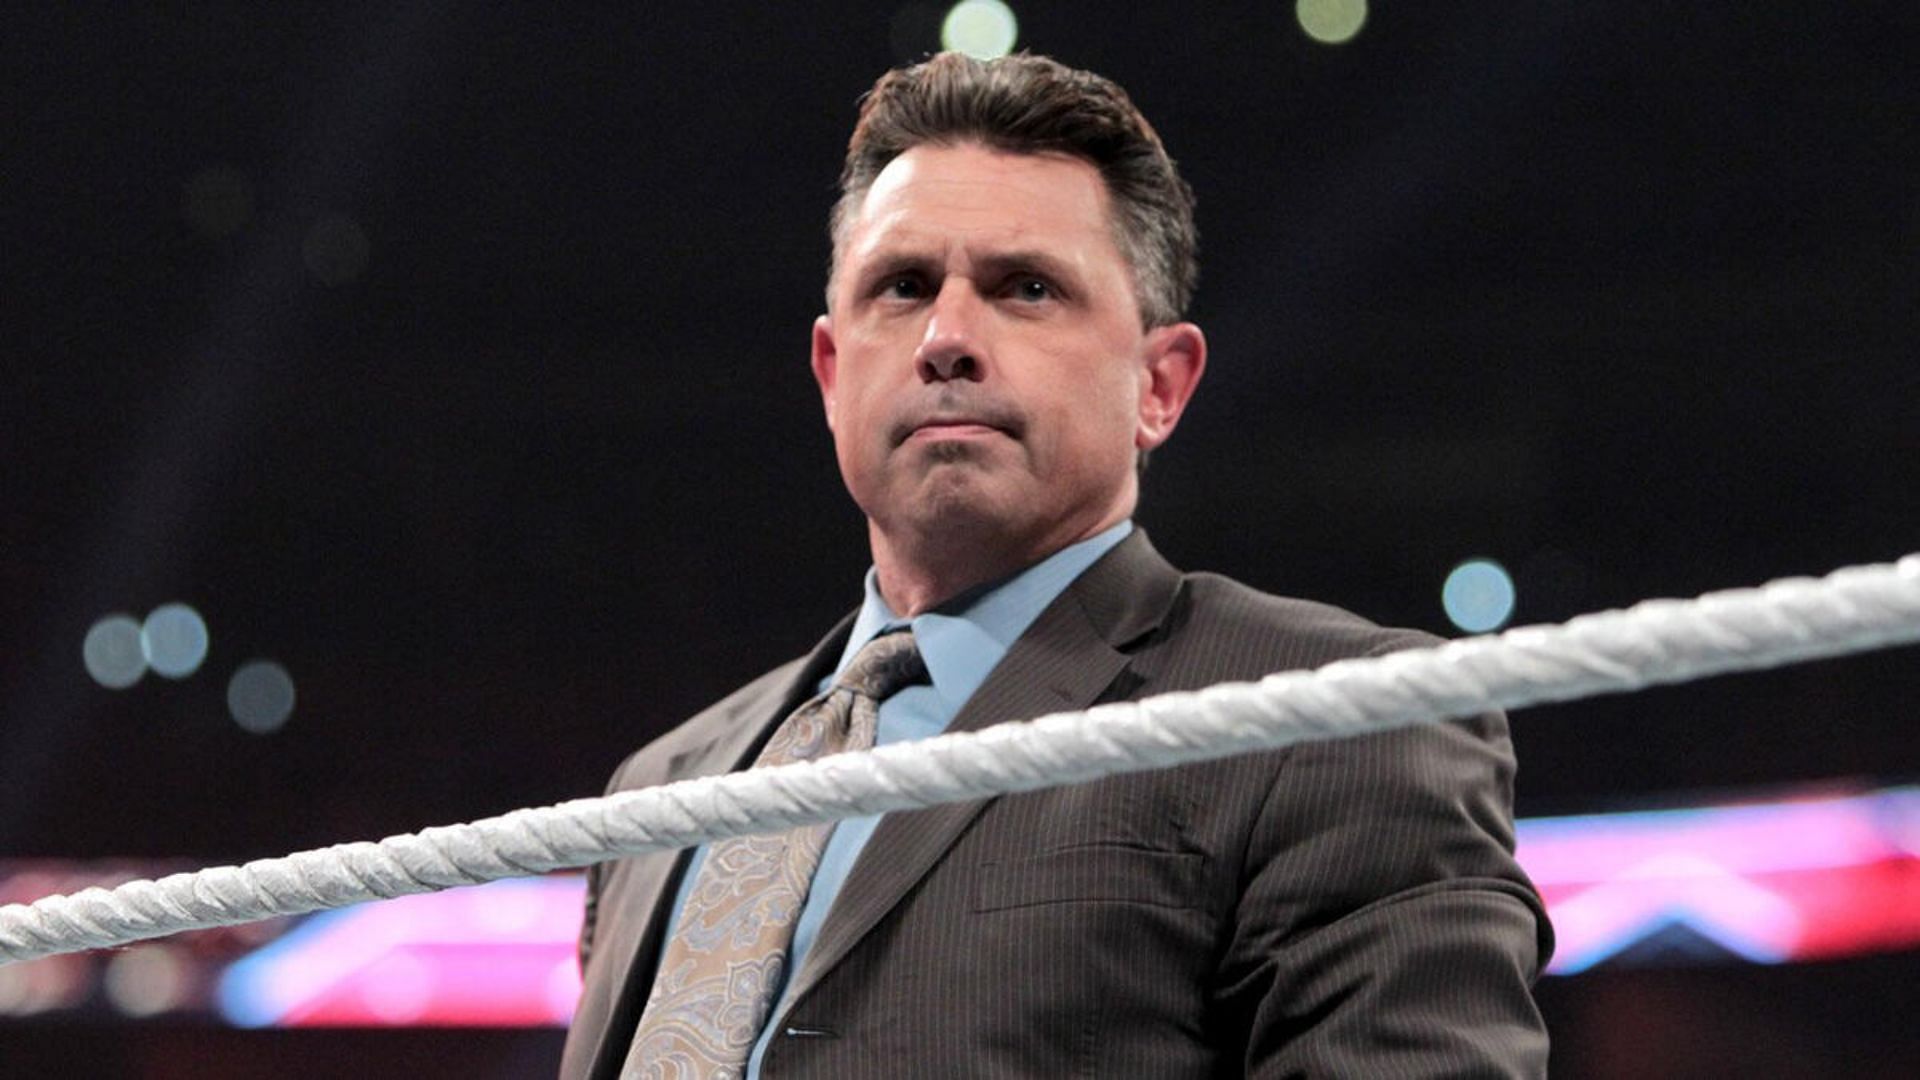 Michael Cole has been with WWE for over 20 years